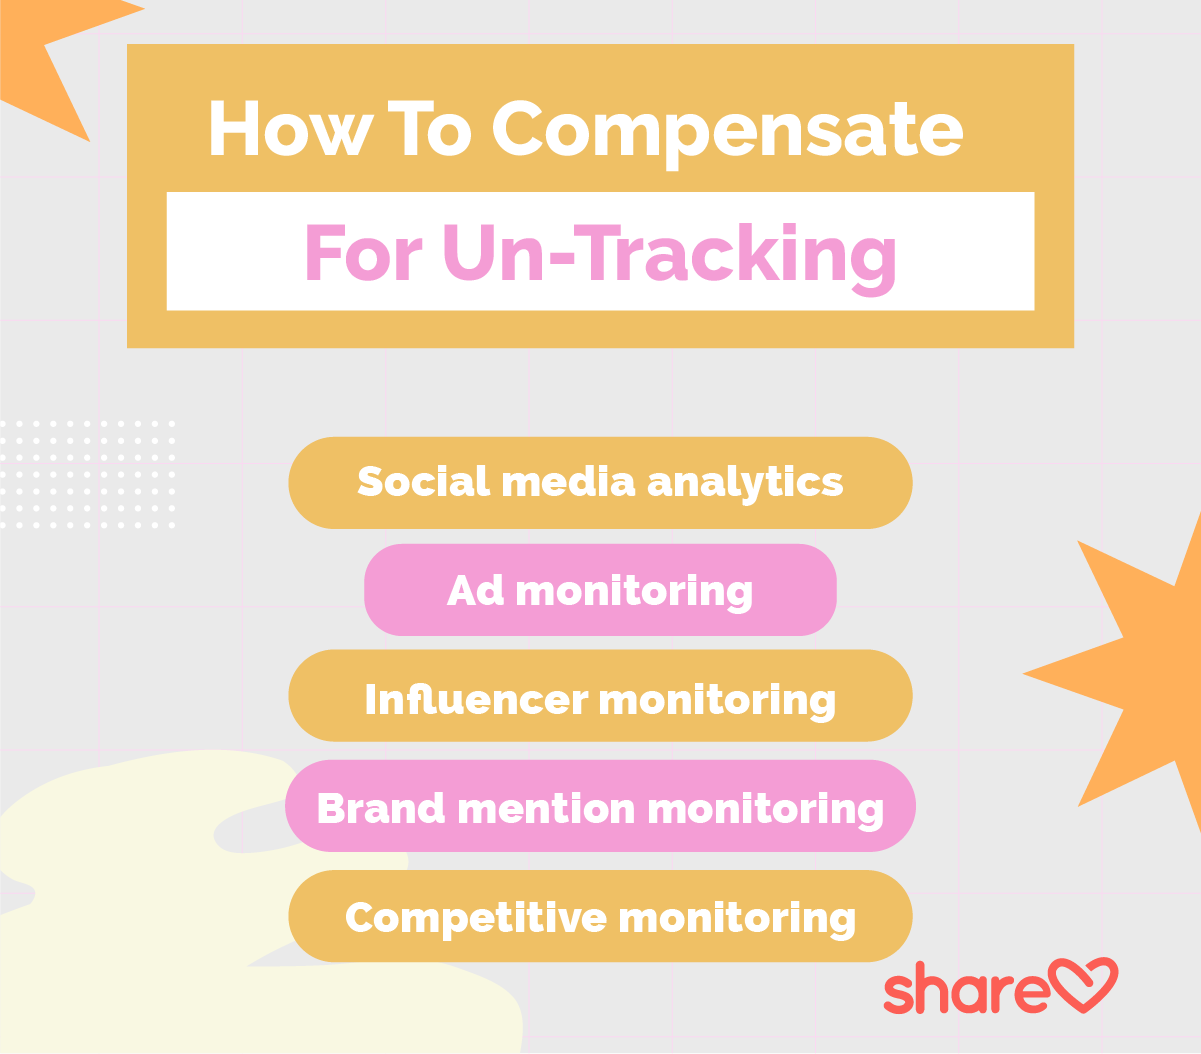 How To Compensate For Un-Tracking